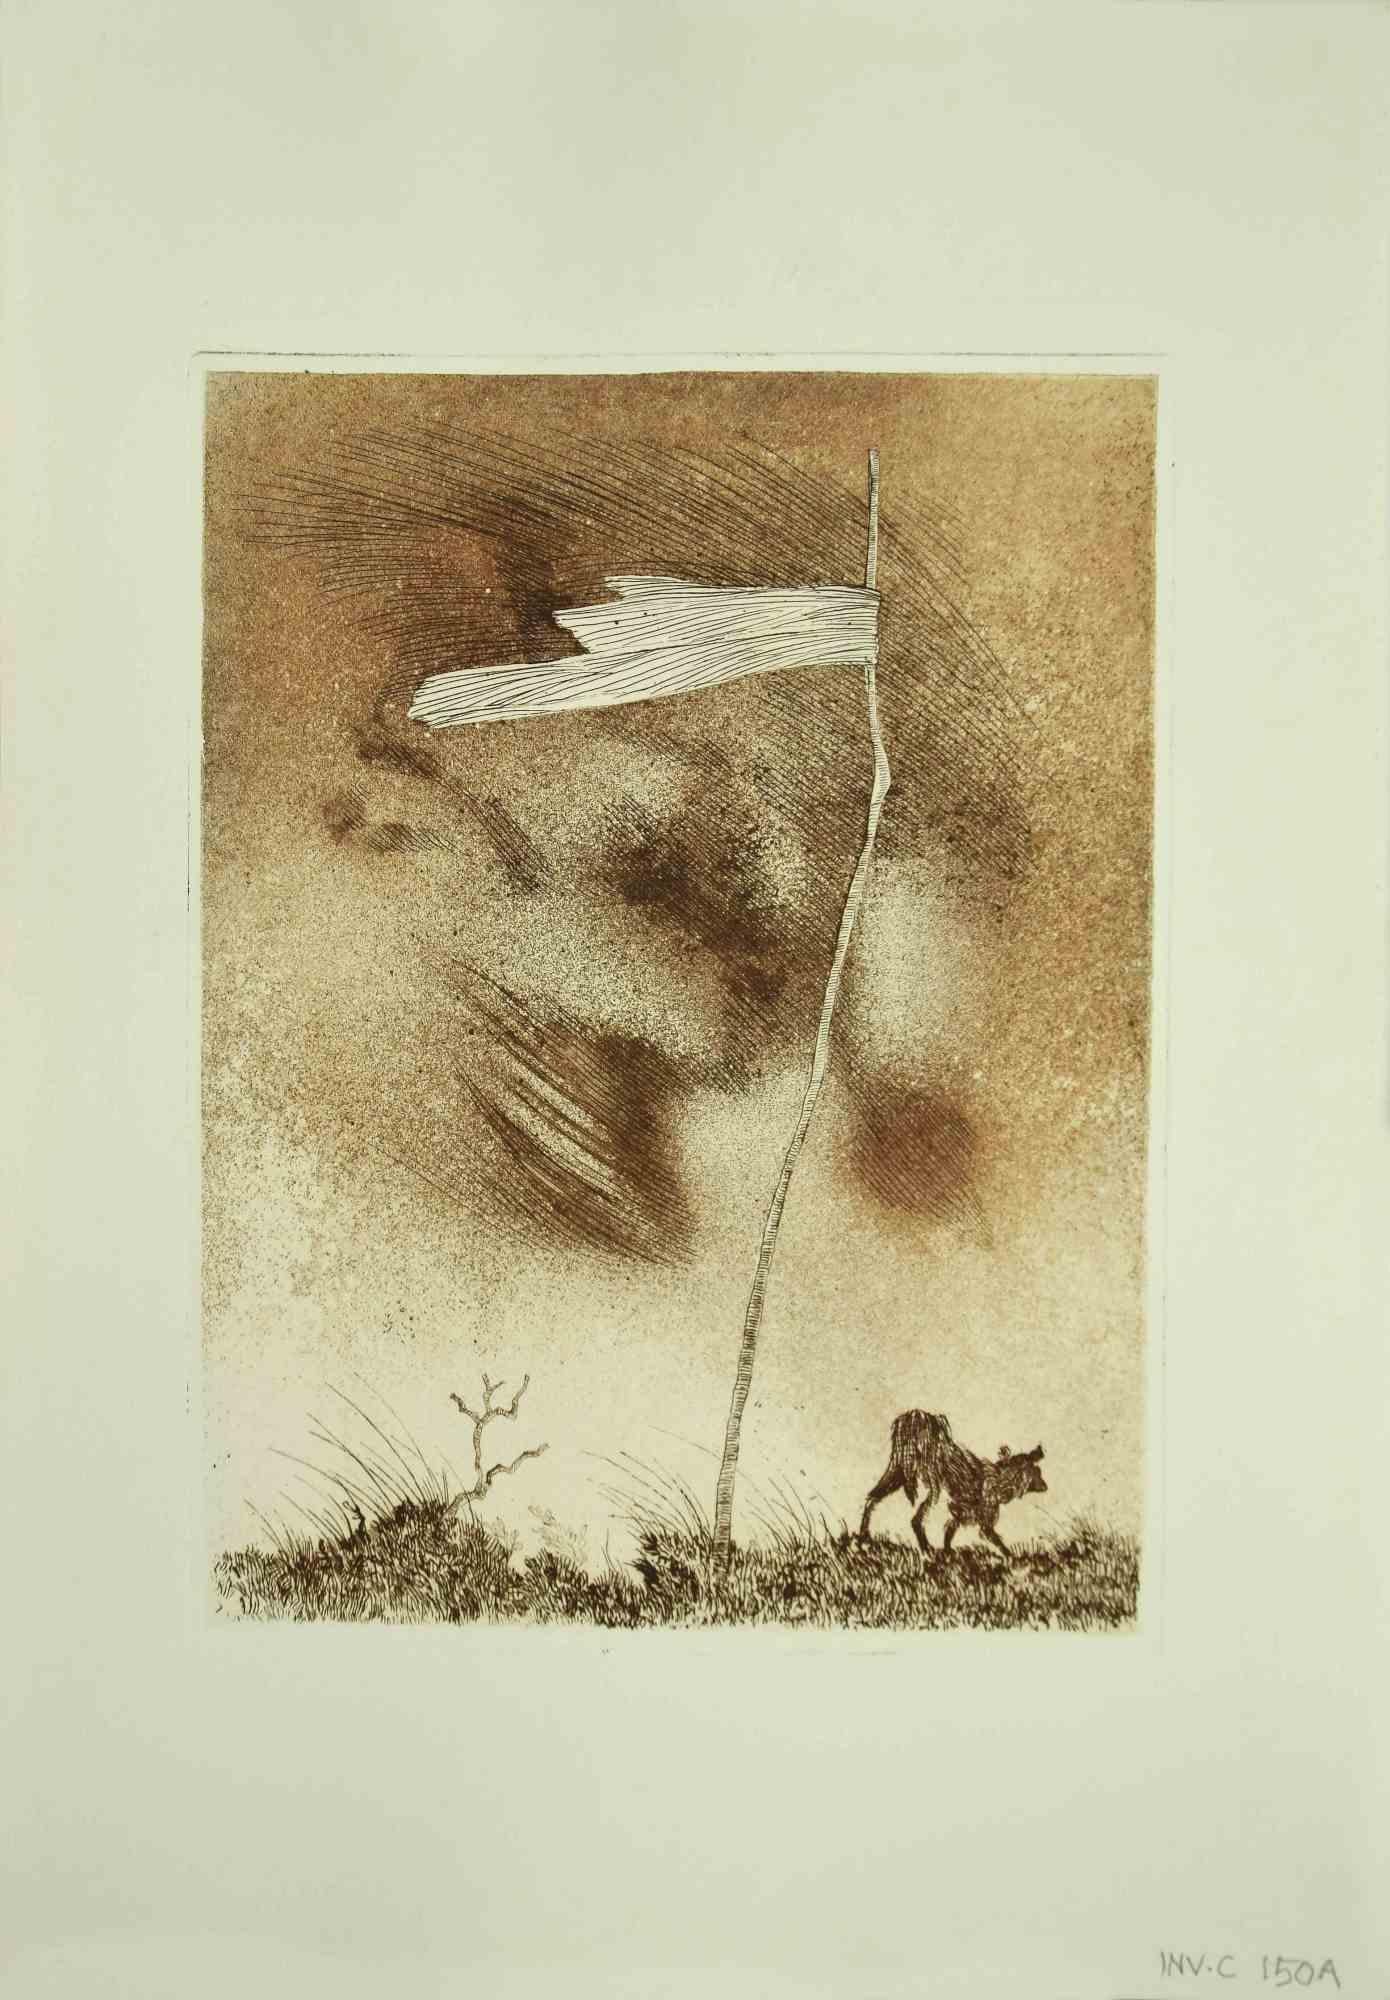 The Flag is an original etching realized by Leo Guida in the 1970s.

Guter Zustand.

The artwork is depicted through strong strokes with perfect hatchings.

Not signed and not dated.